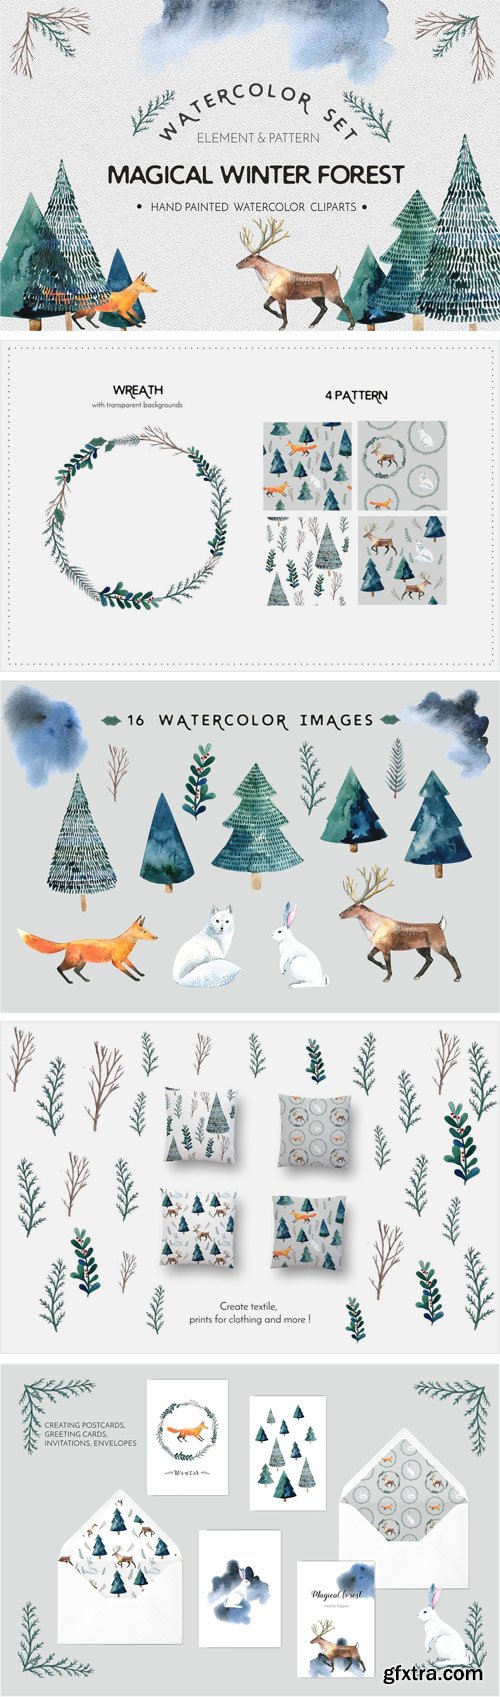 CM - Watercolor Set Magical Winter Forest 1921010